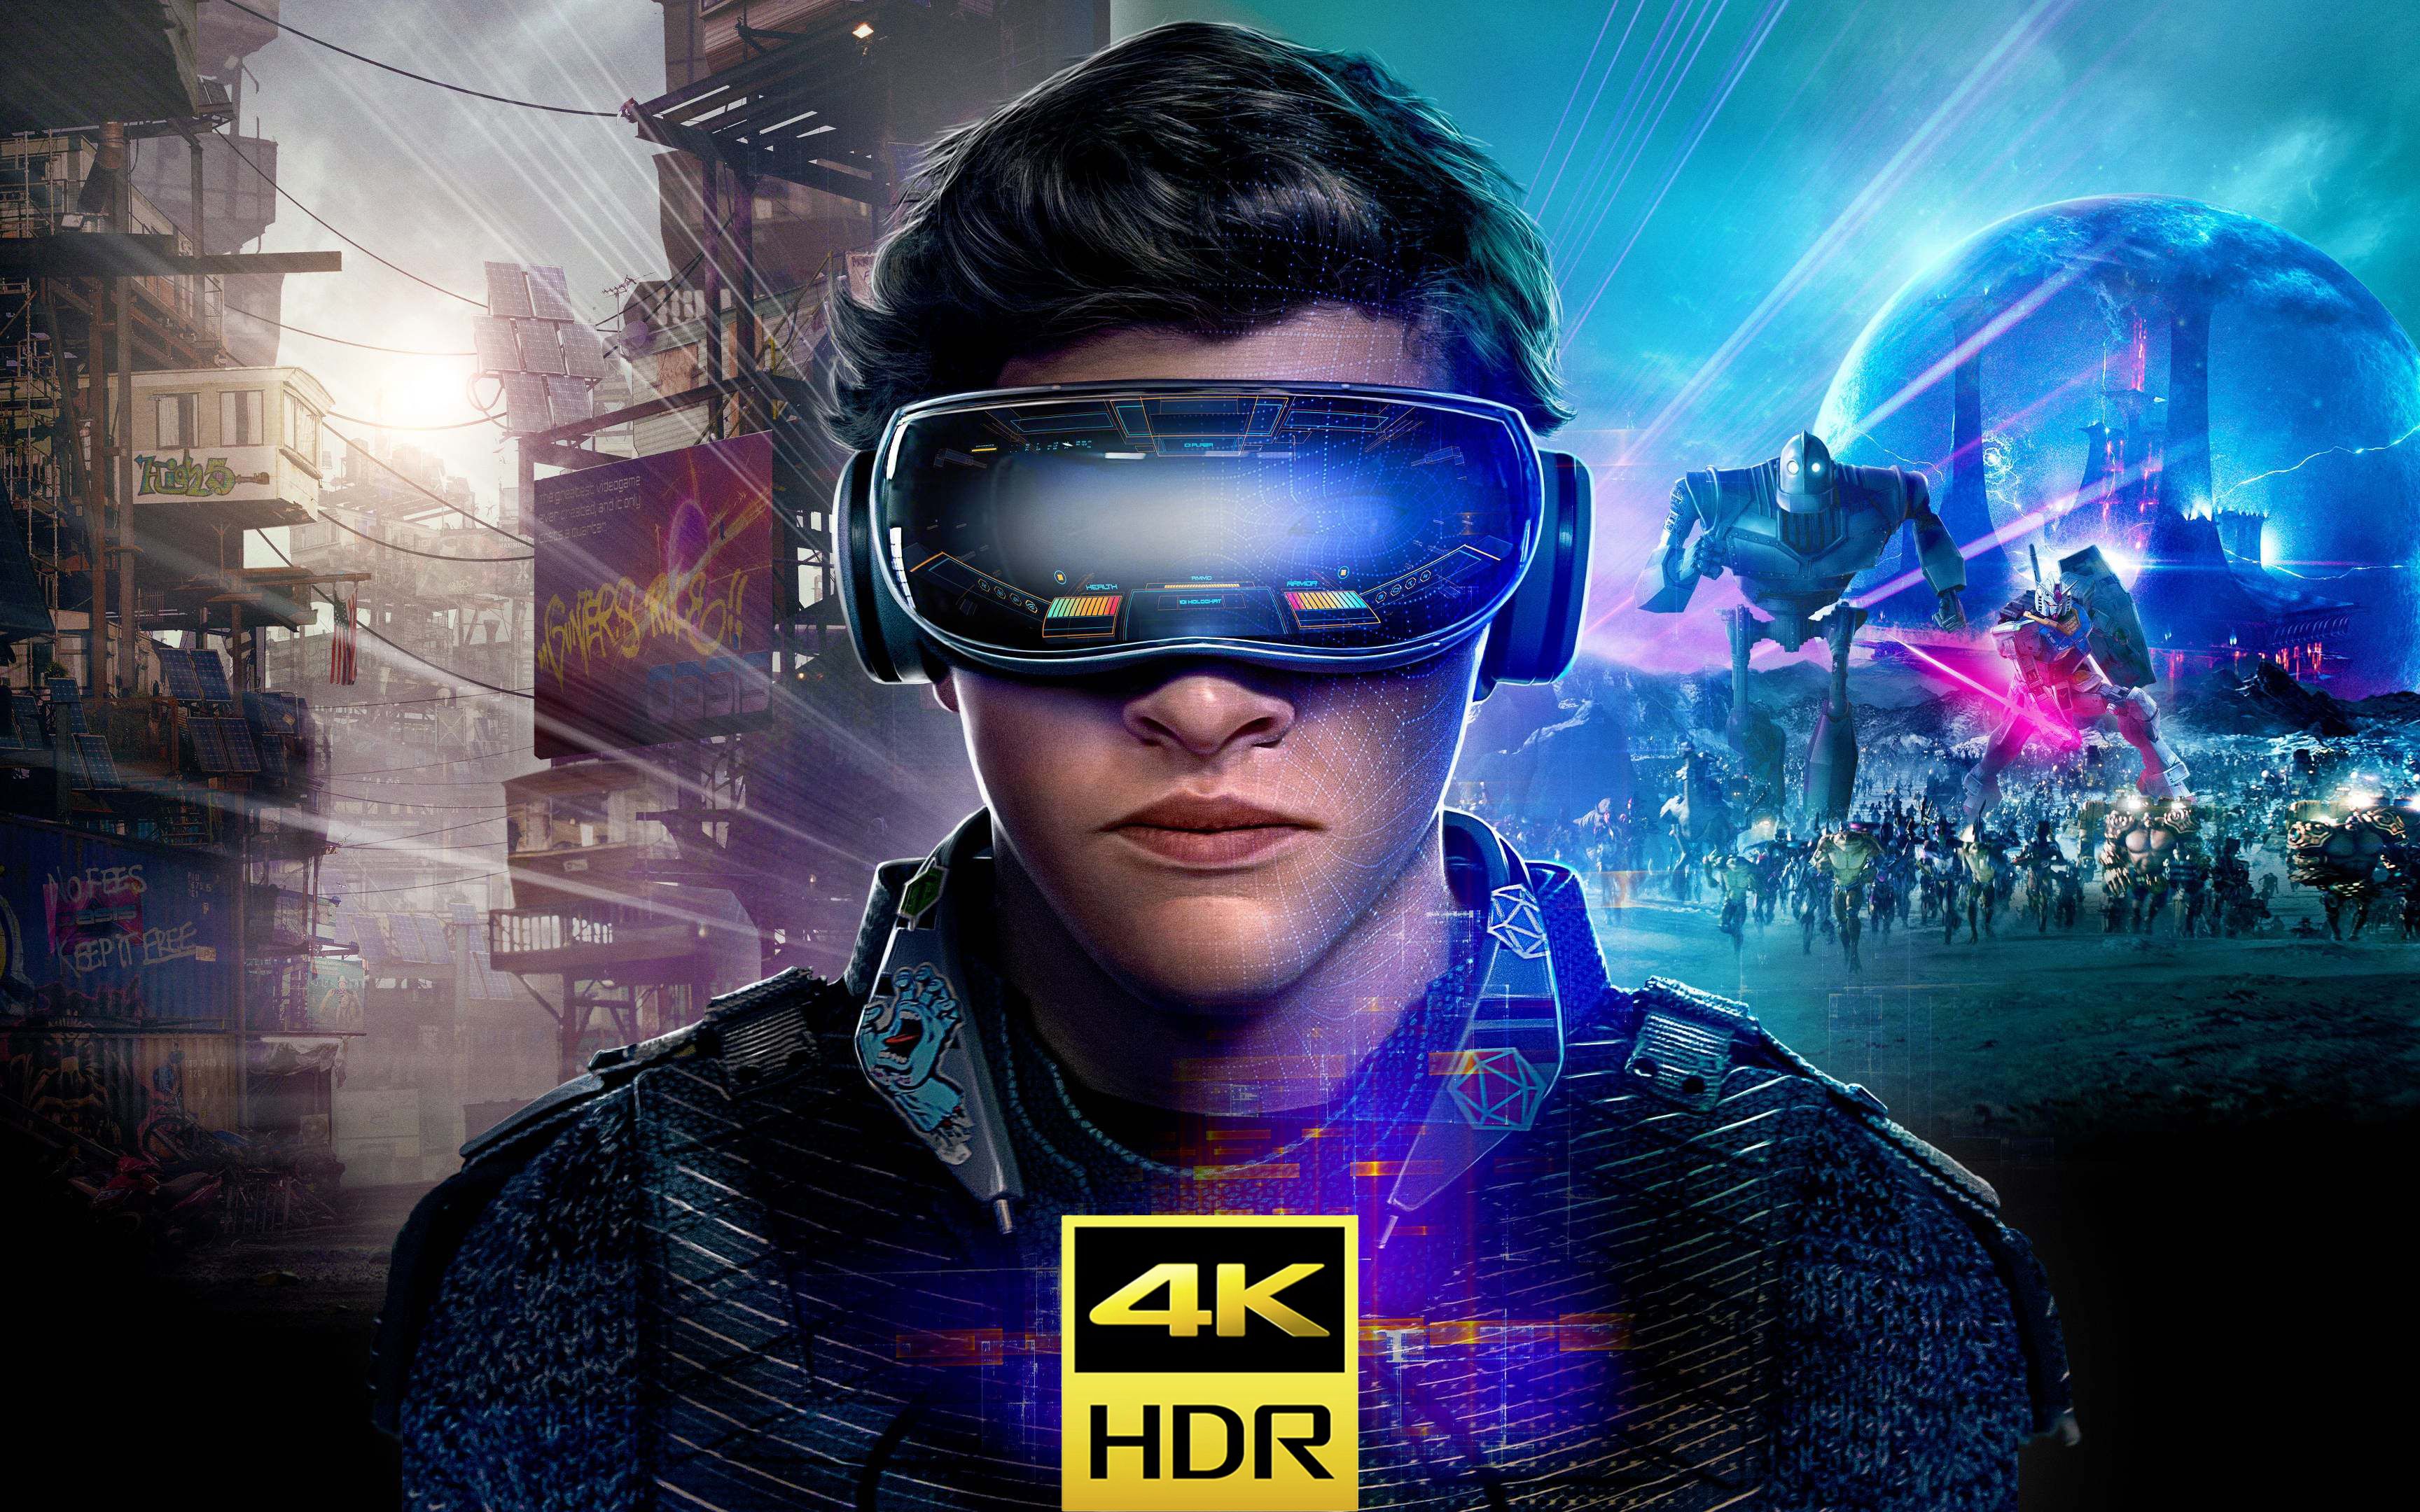 HDR分享之 头号玩家 Ready Player One (2018) - Trailer #2 [4K HDR]